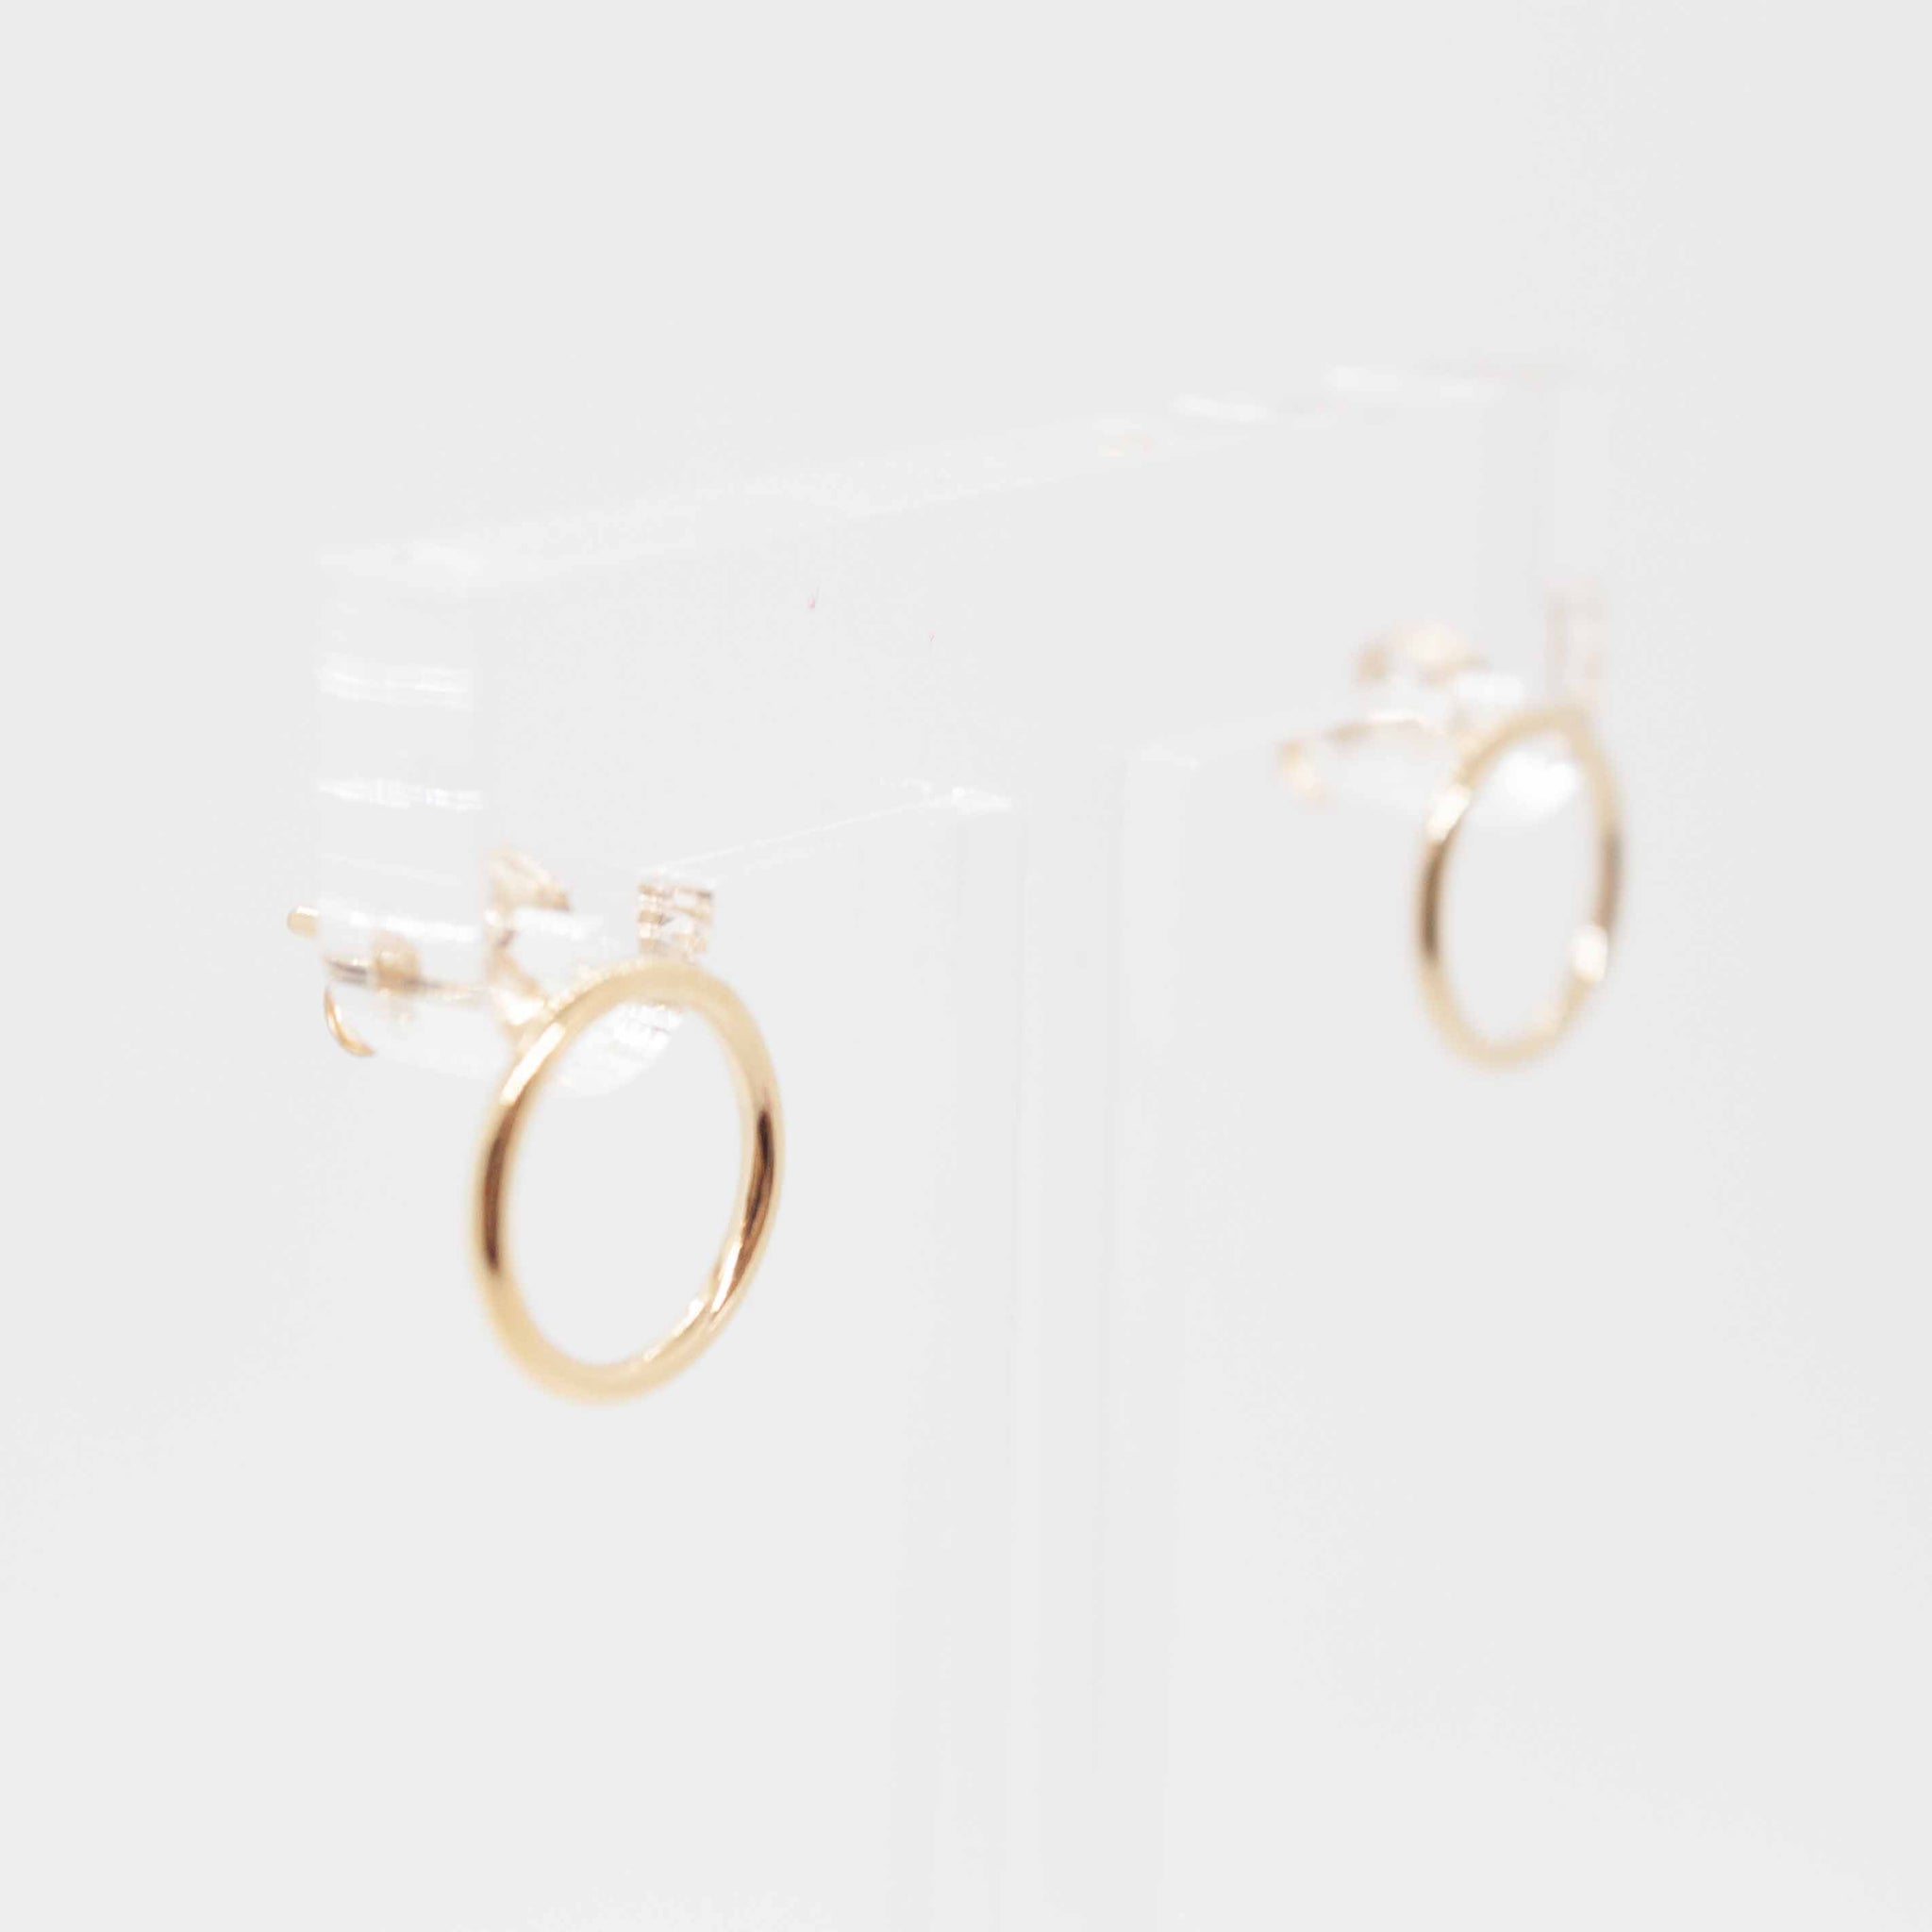 Gold circle stud earrings with butterfly backings